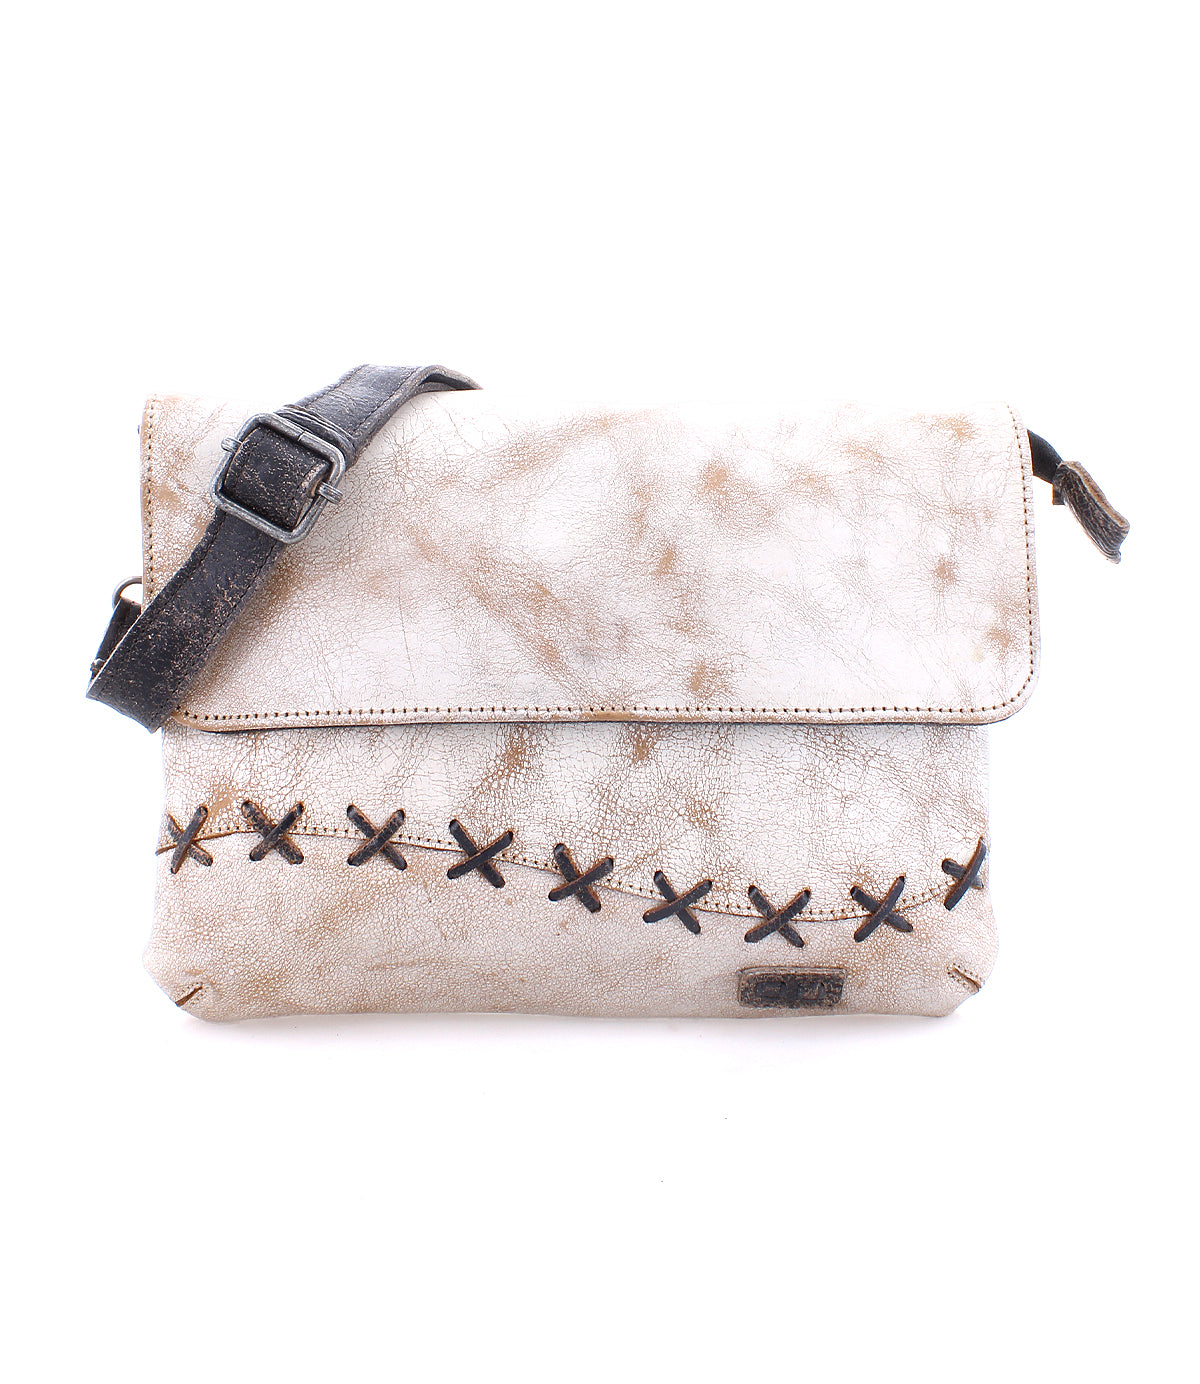 Bed Stu Cleo leather crossbody bag with cross-stitch detailing and a zipper top closure on a white background.